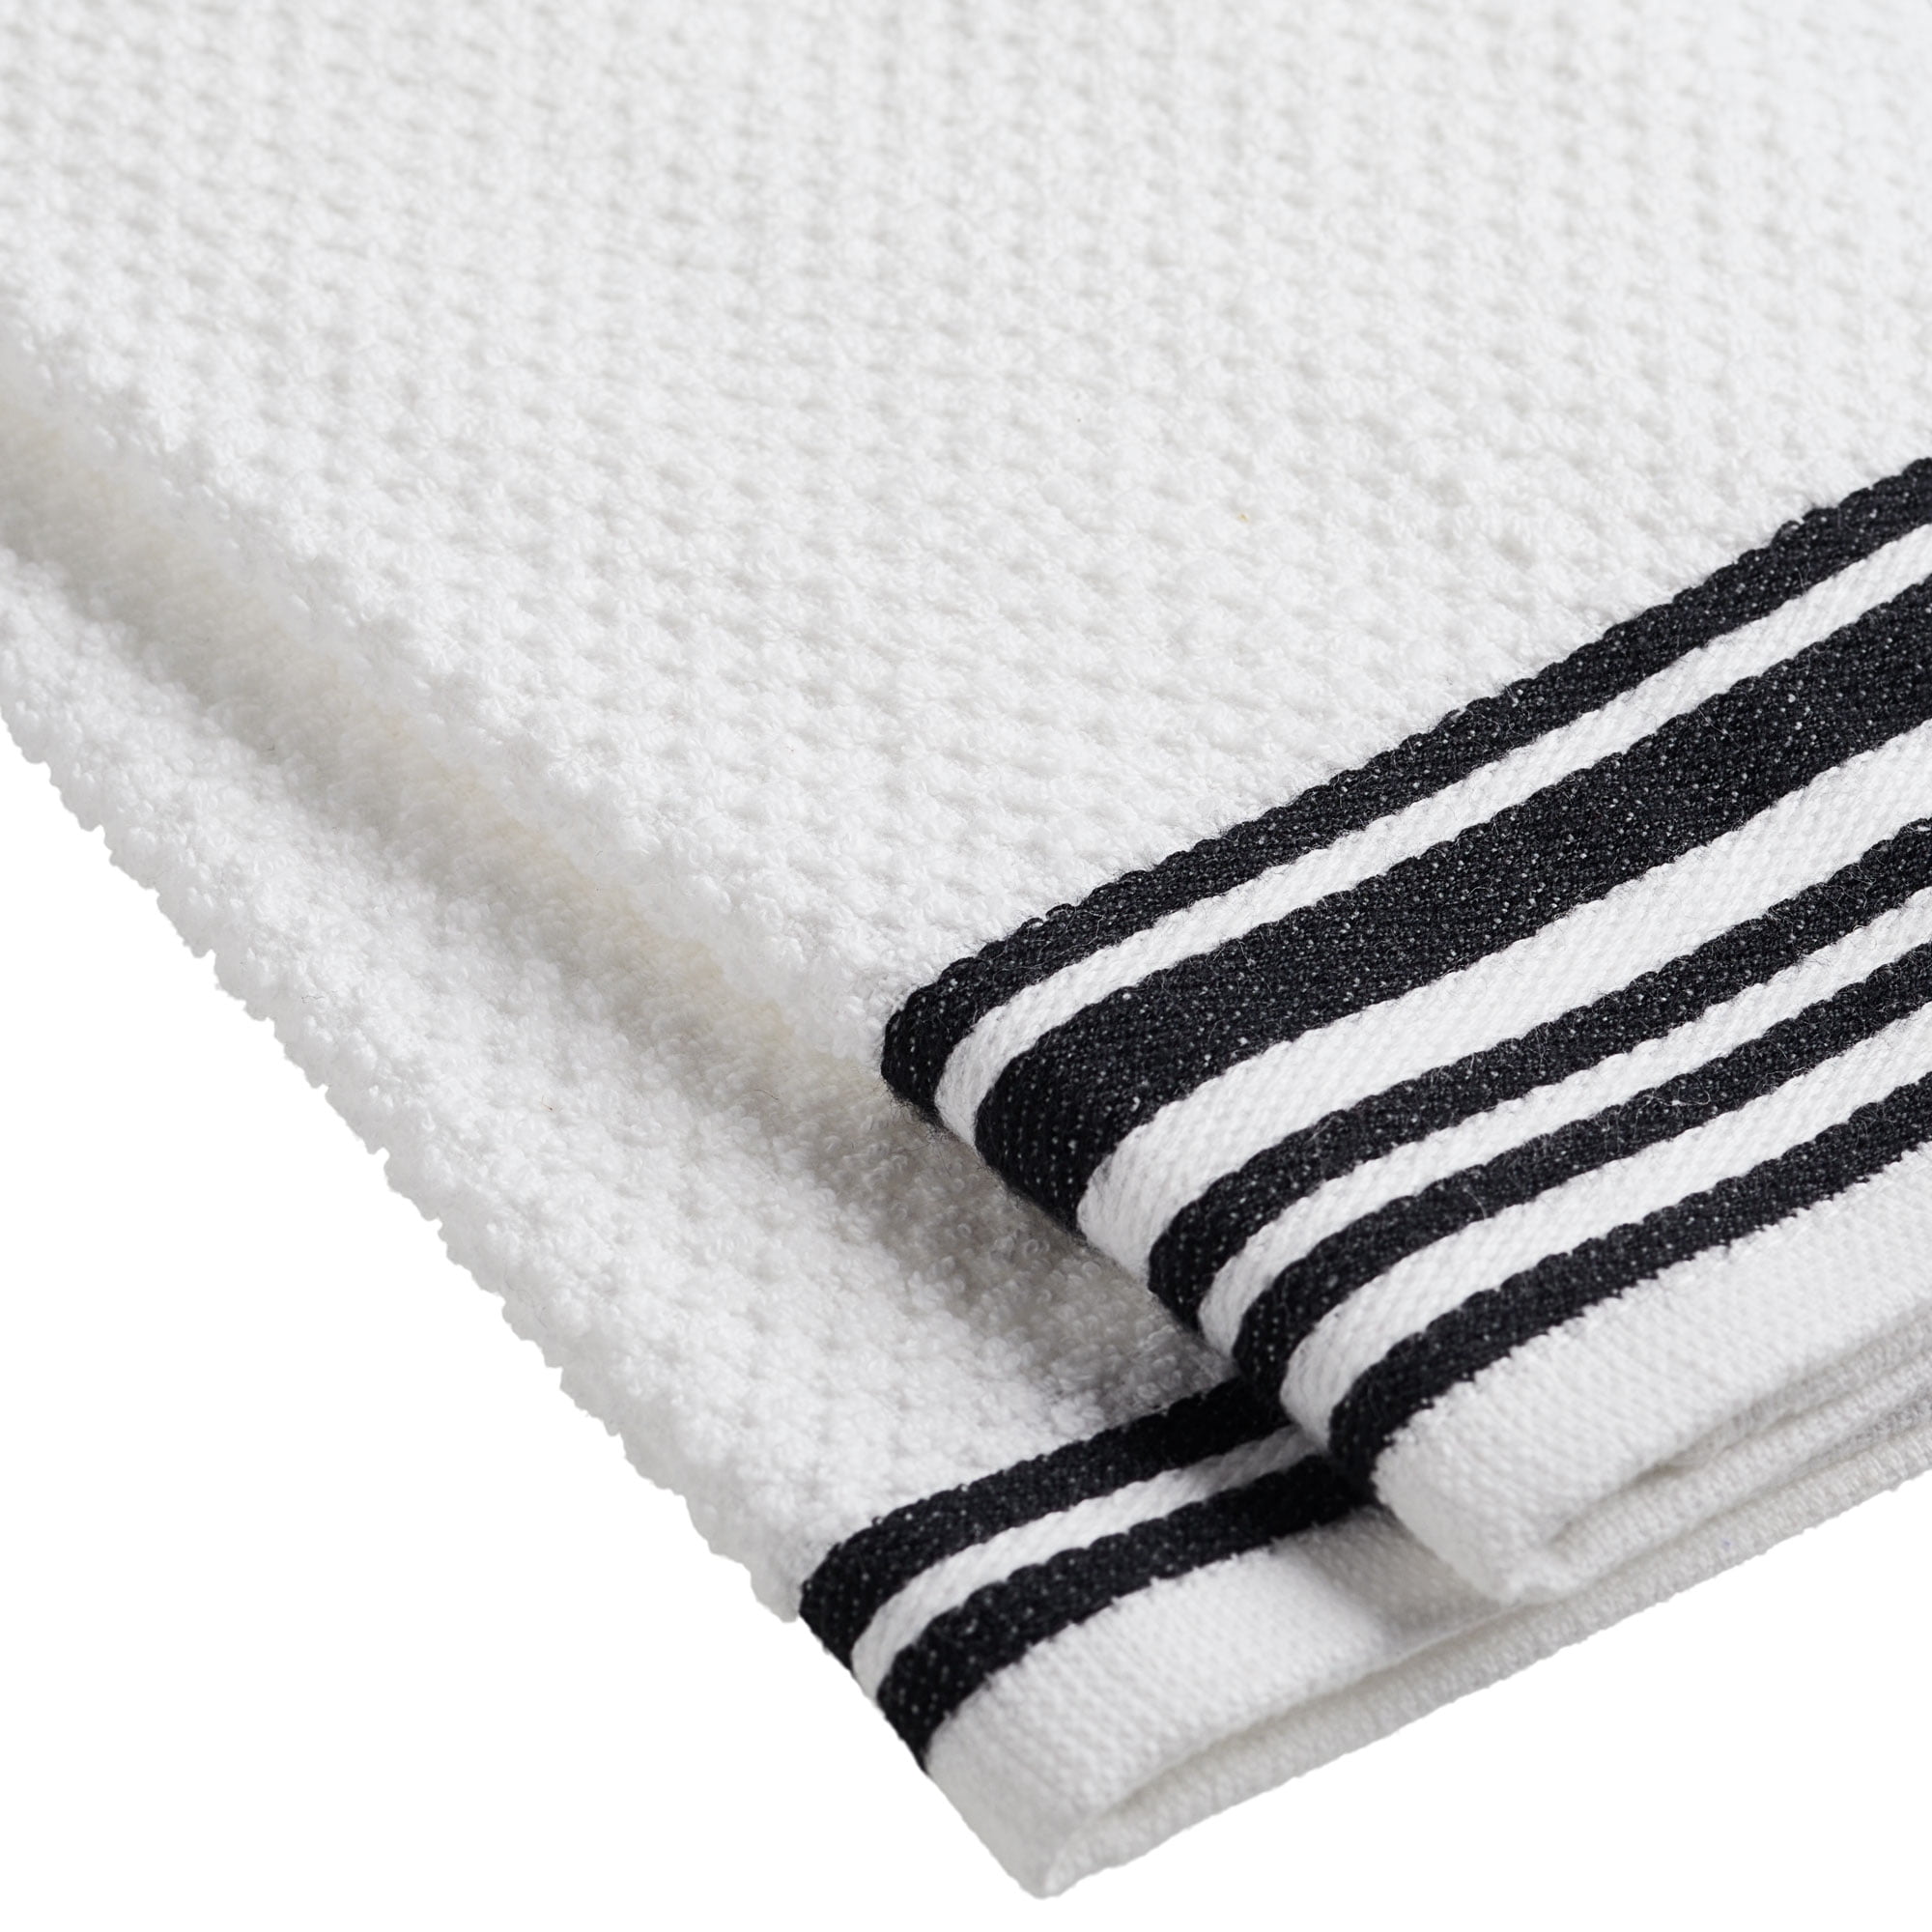 Mainstays 4-Pack 16”x26” Woven Kitchen Towel Set, Grey Flannel